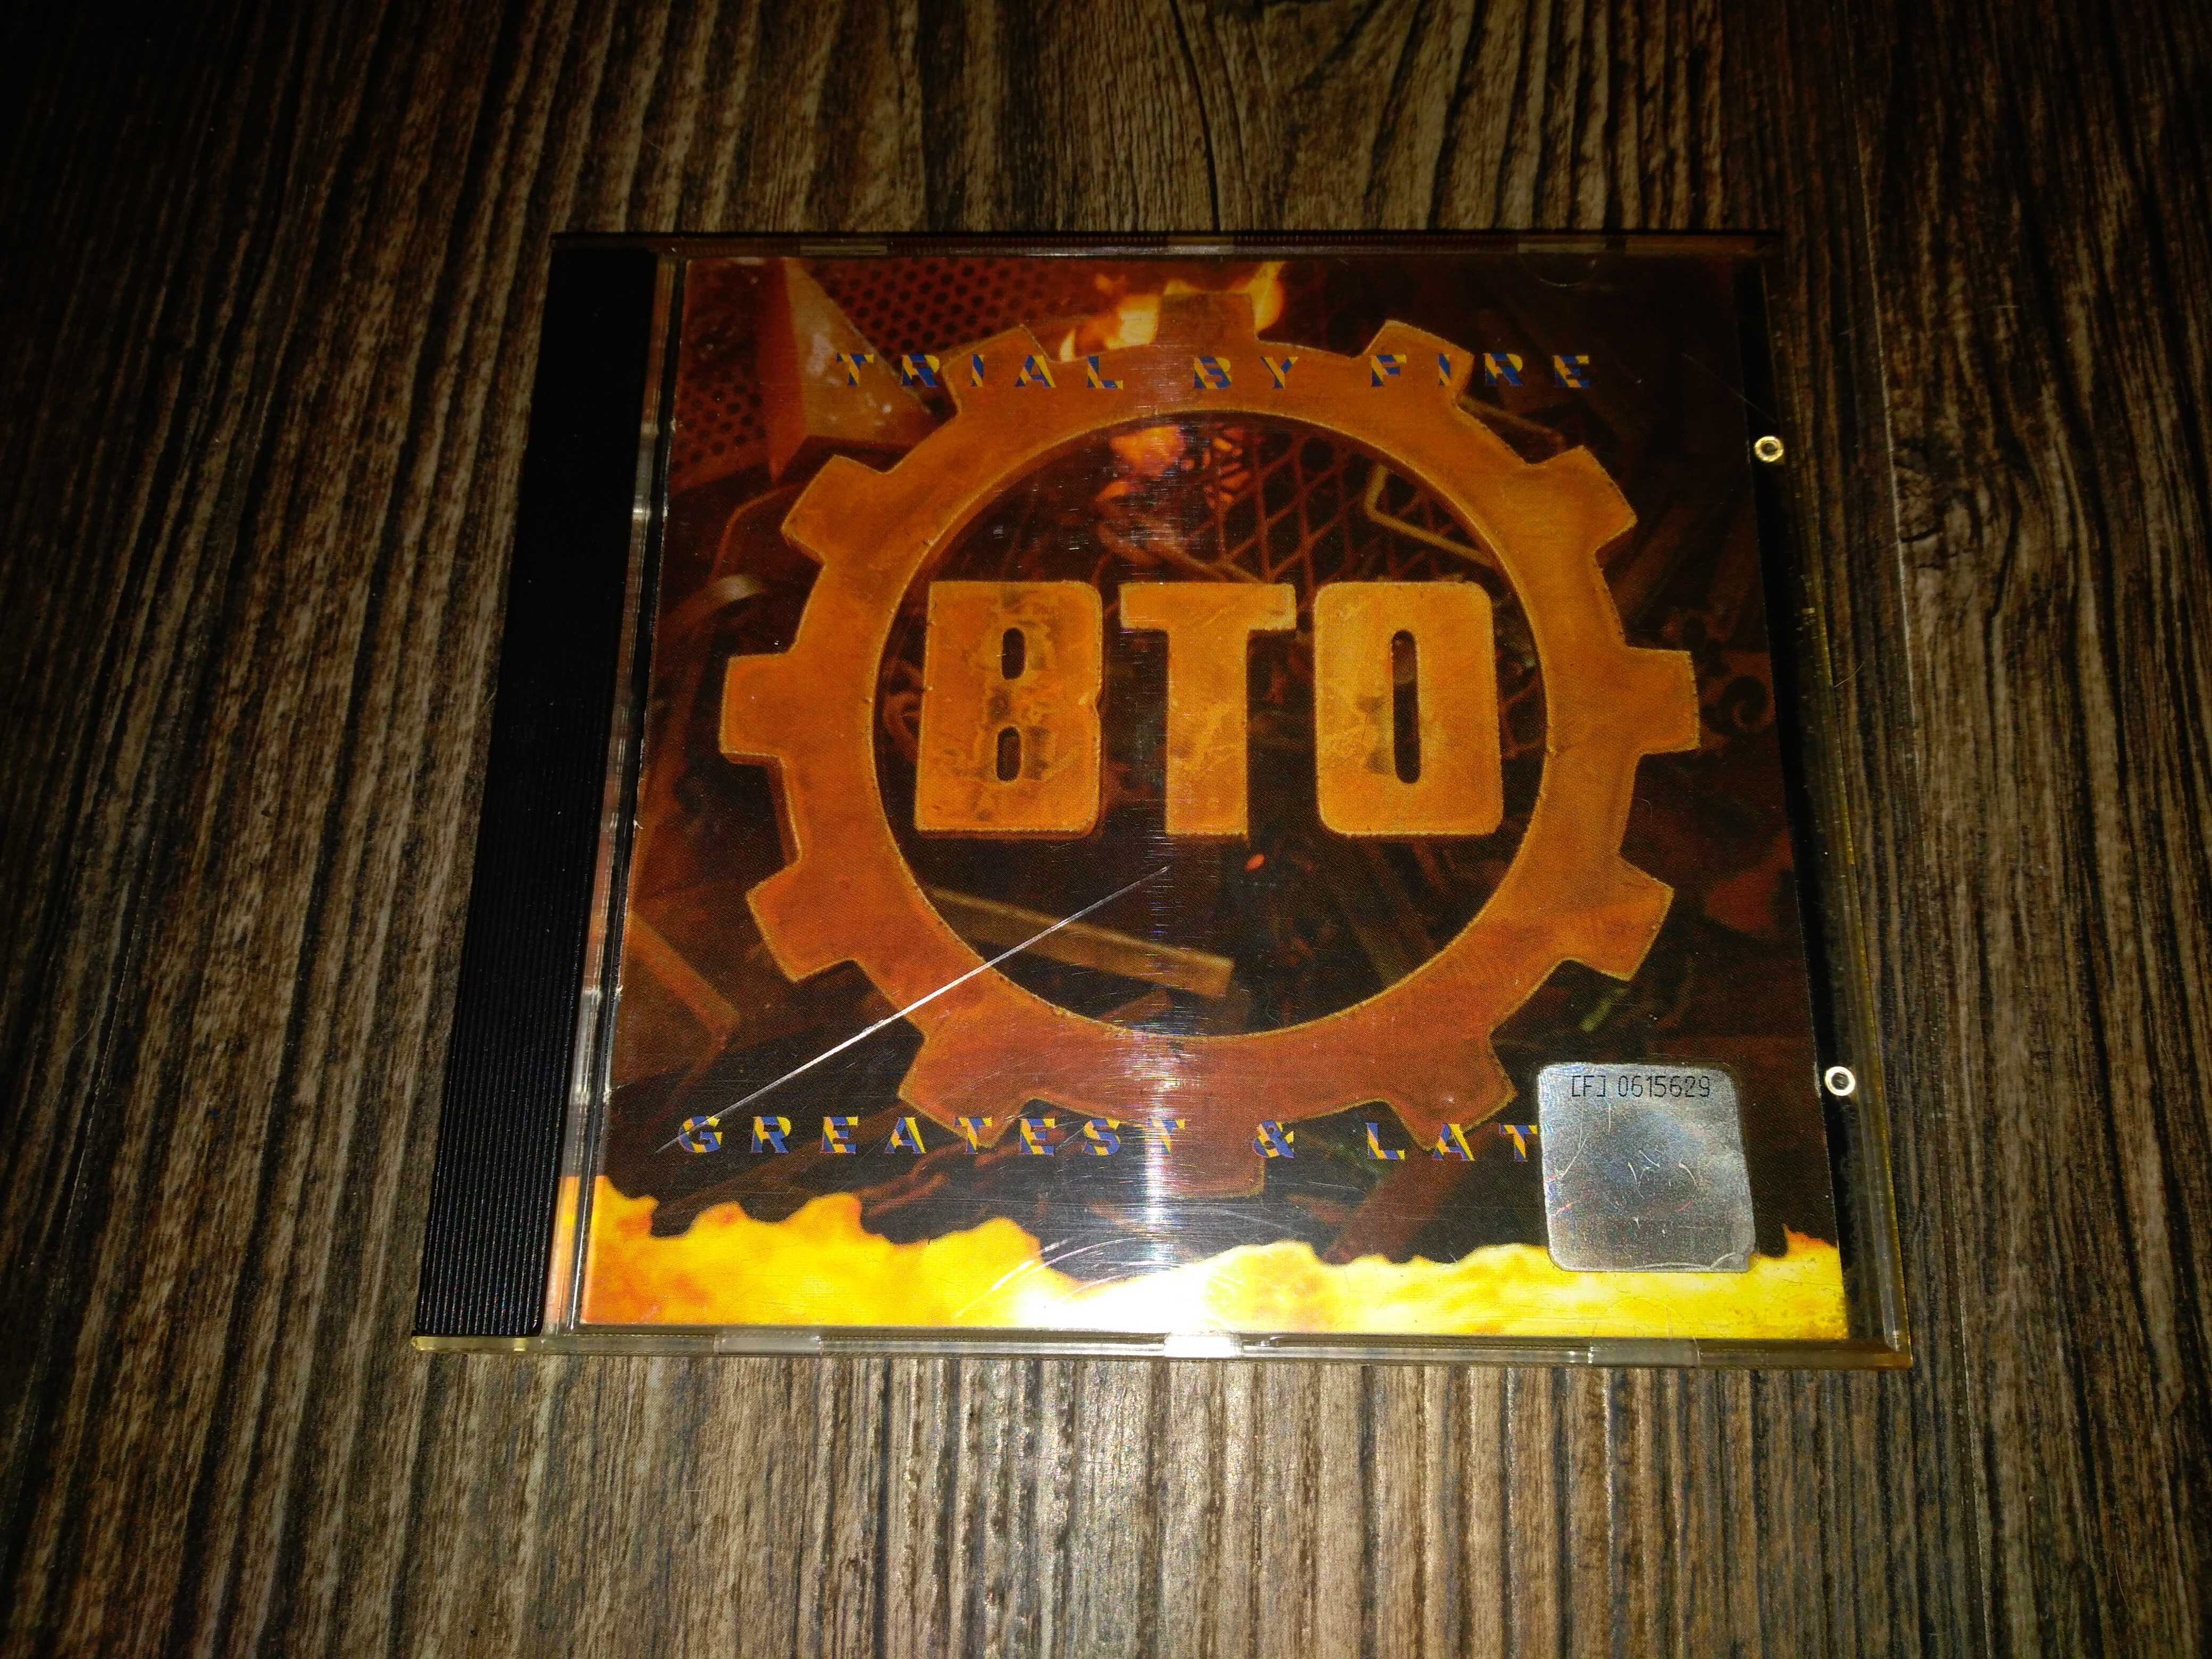 Bachman-Turner Overdrive. Trial By Fire Greatest & Latest. 1996 CMC.